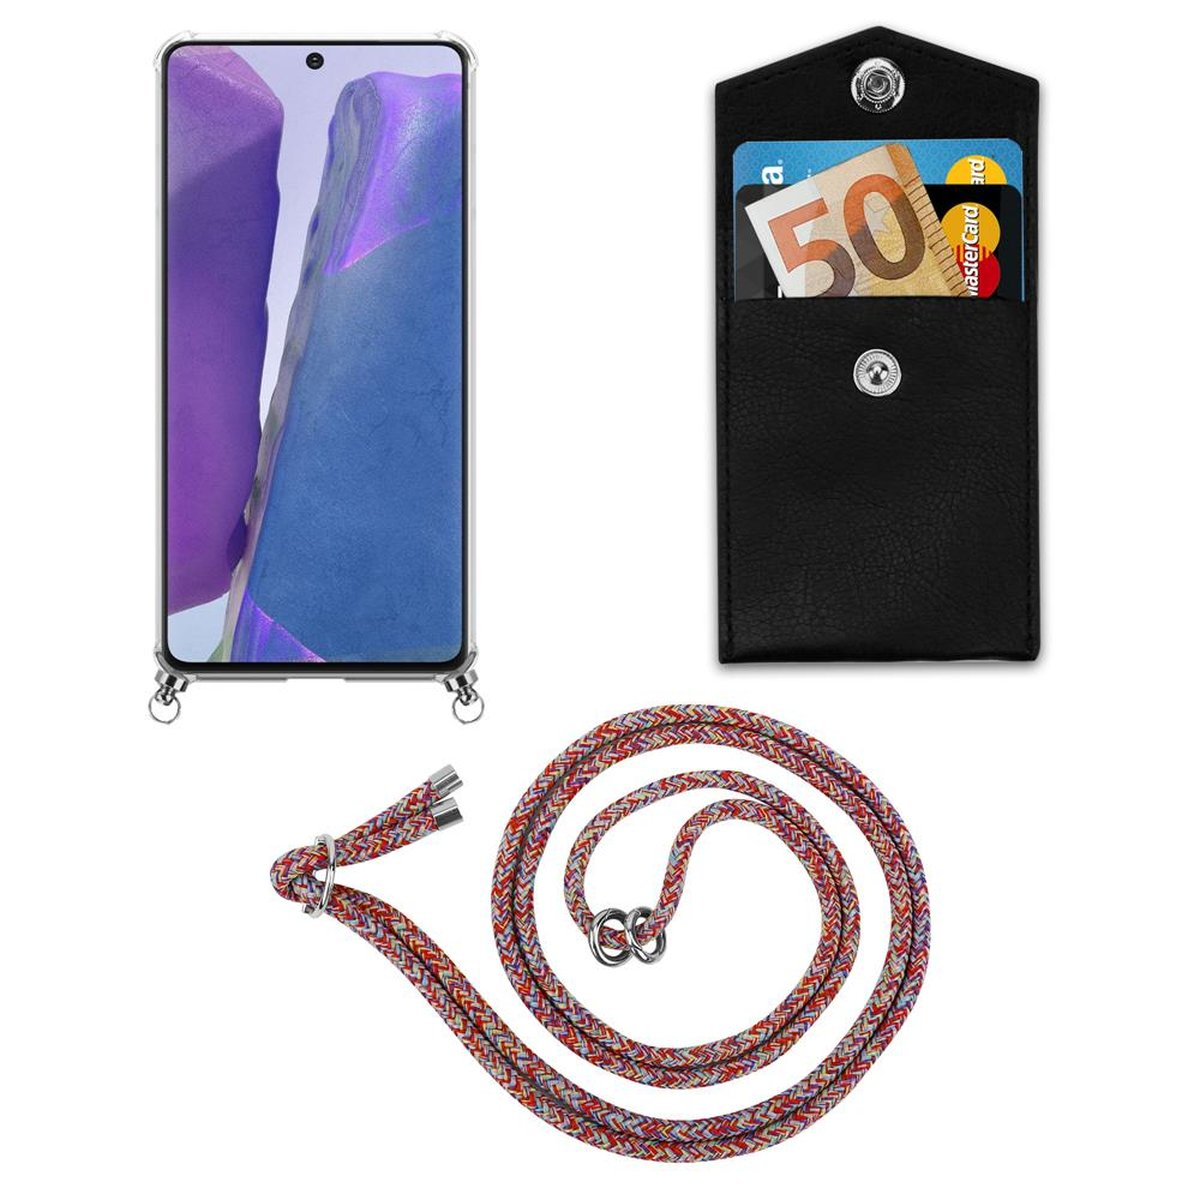 Backcover, abnehmbarer Galaxy Hülle, COLORFUL 20, NOTE Kordel Handy Samsung, CADORABO Silber Band und PARROT Kette mit Ringen,